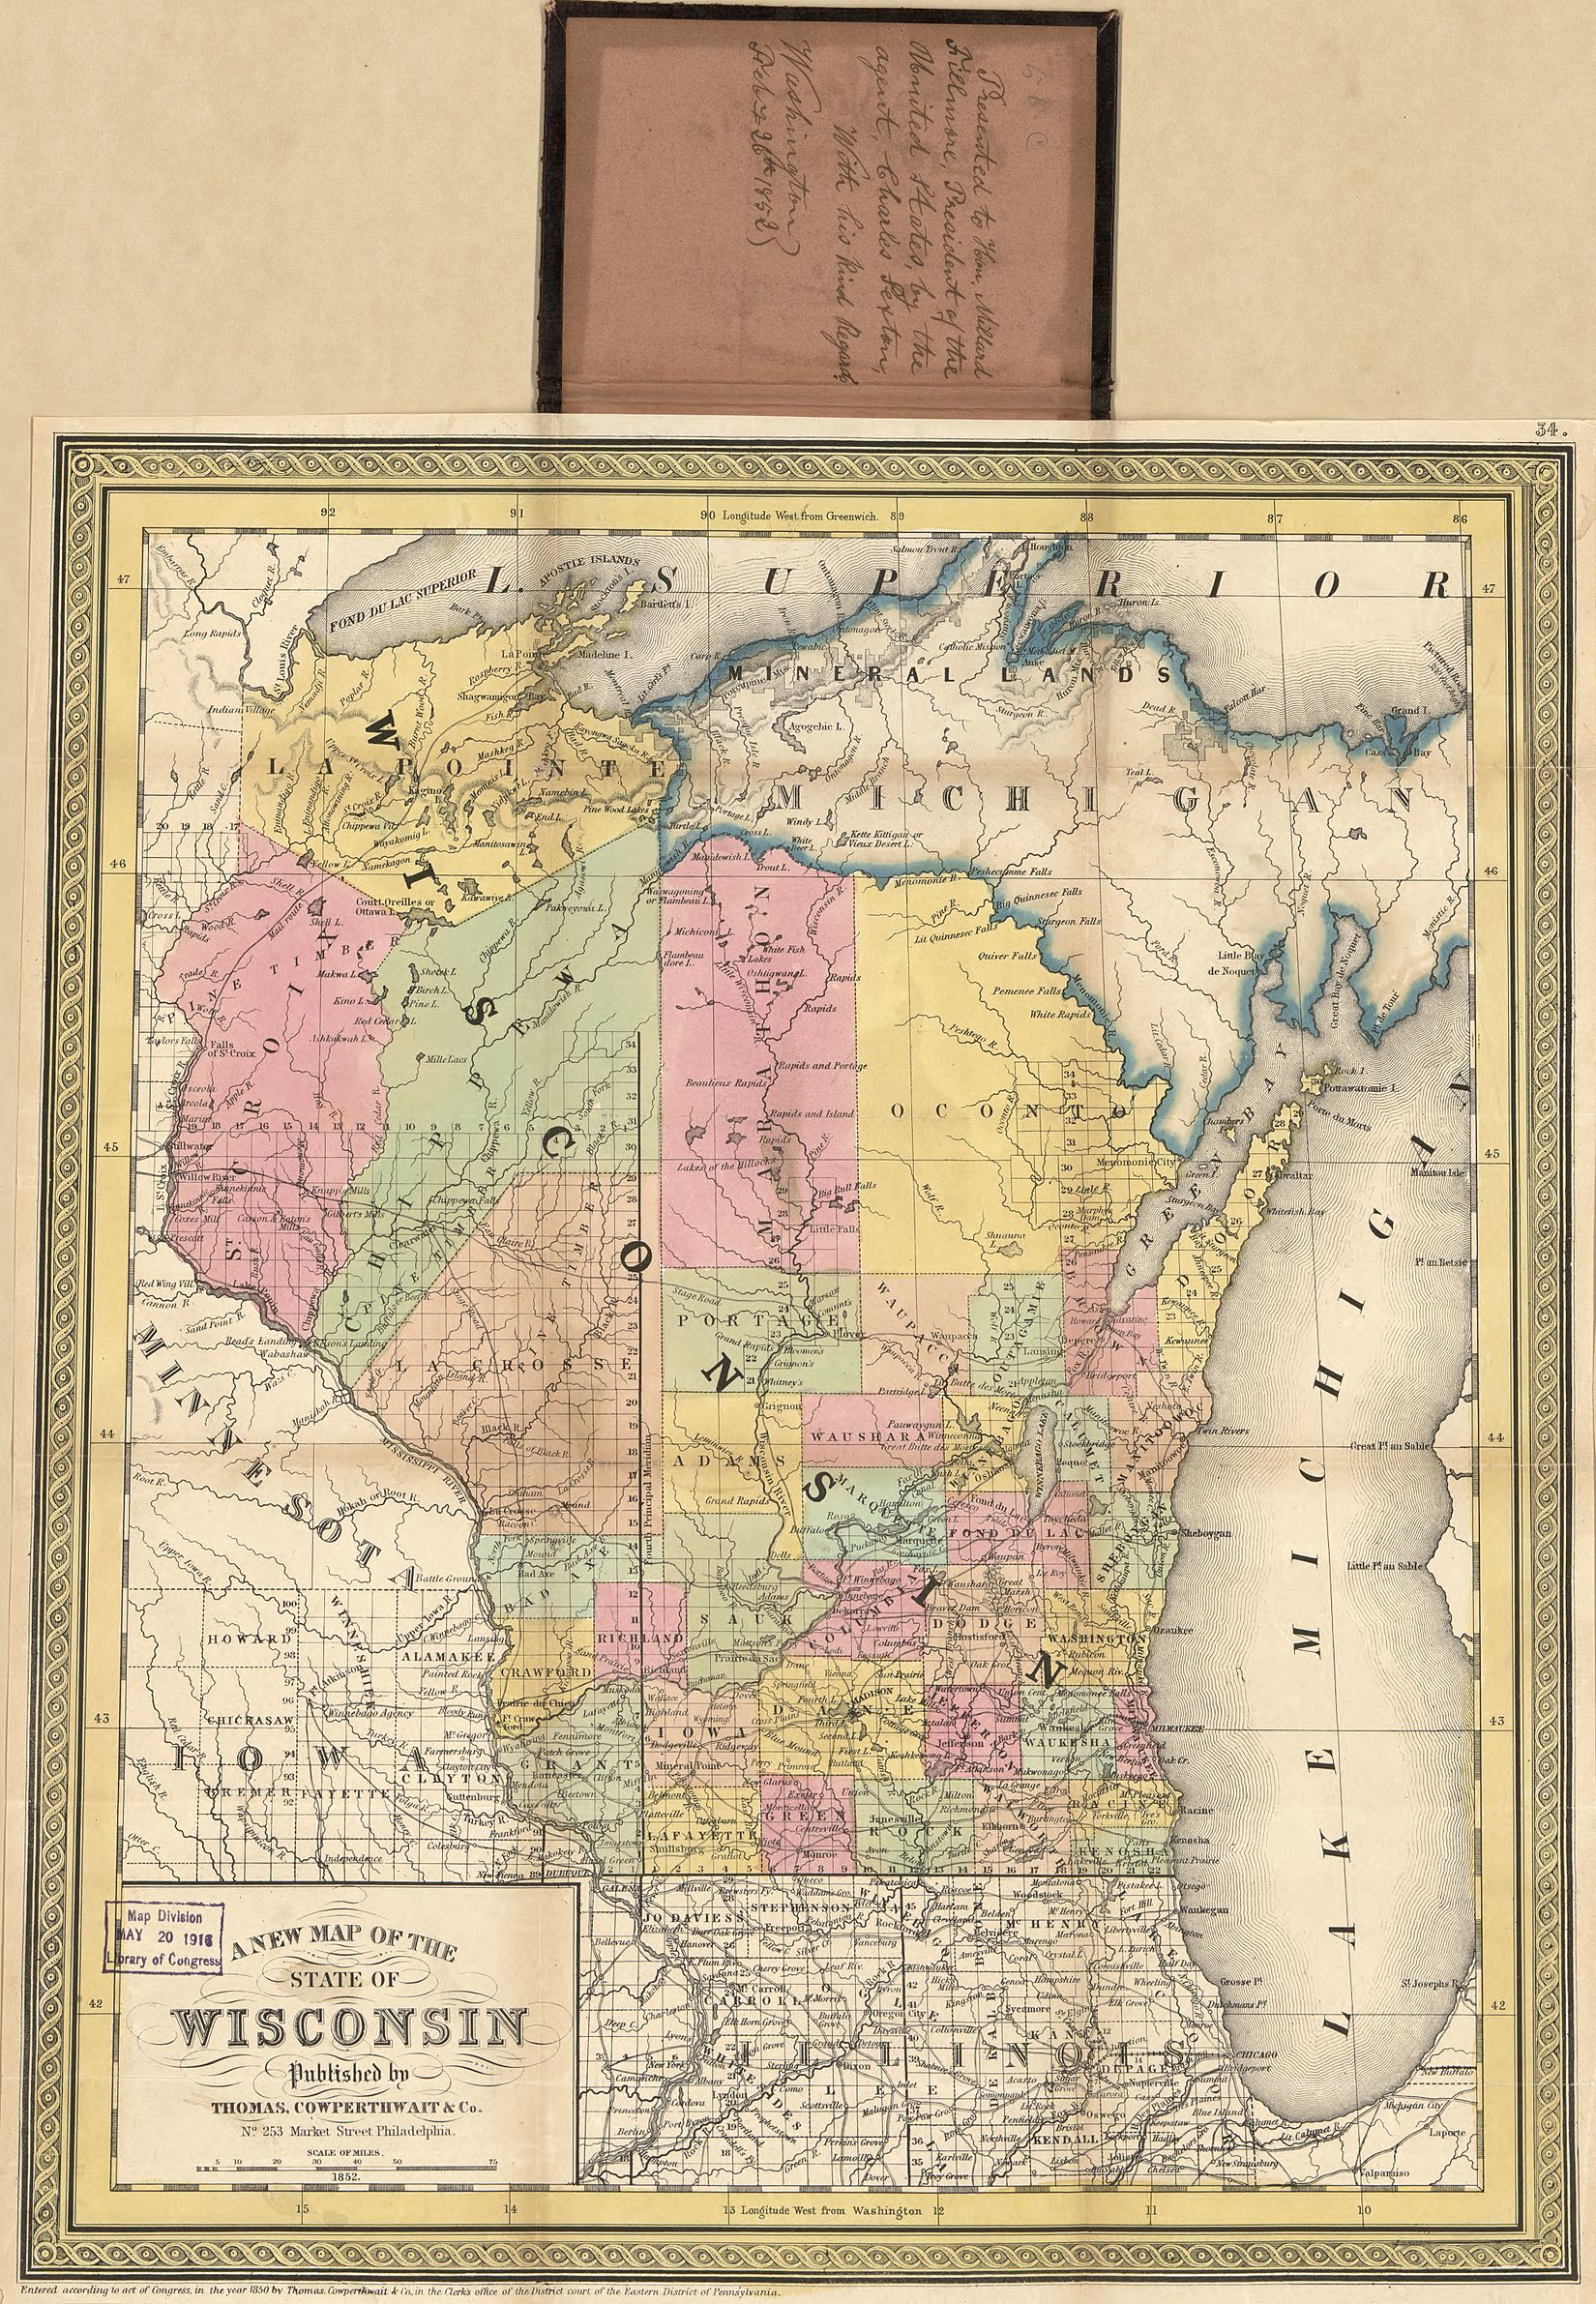 1852 boundaries of Door County, prior to the separation of Kewaunee County in 1852